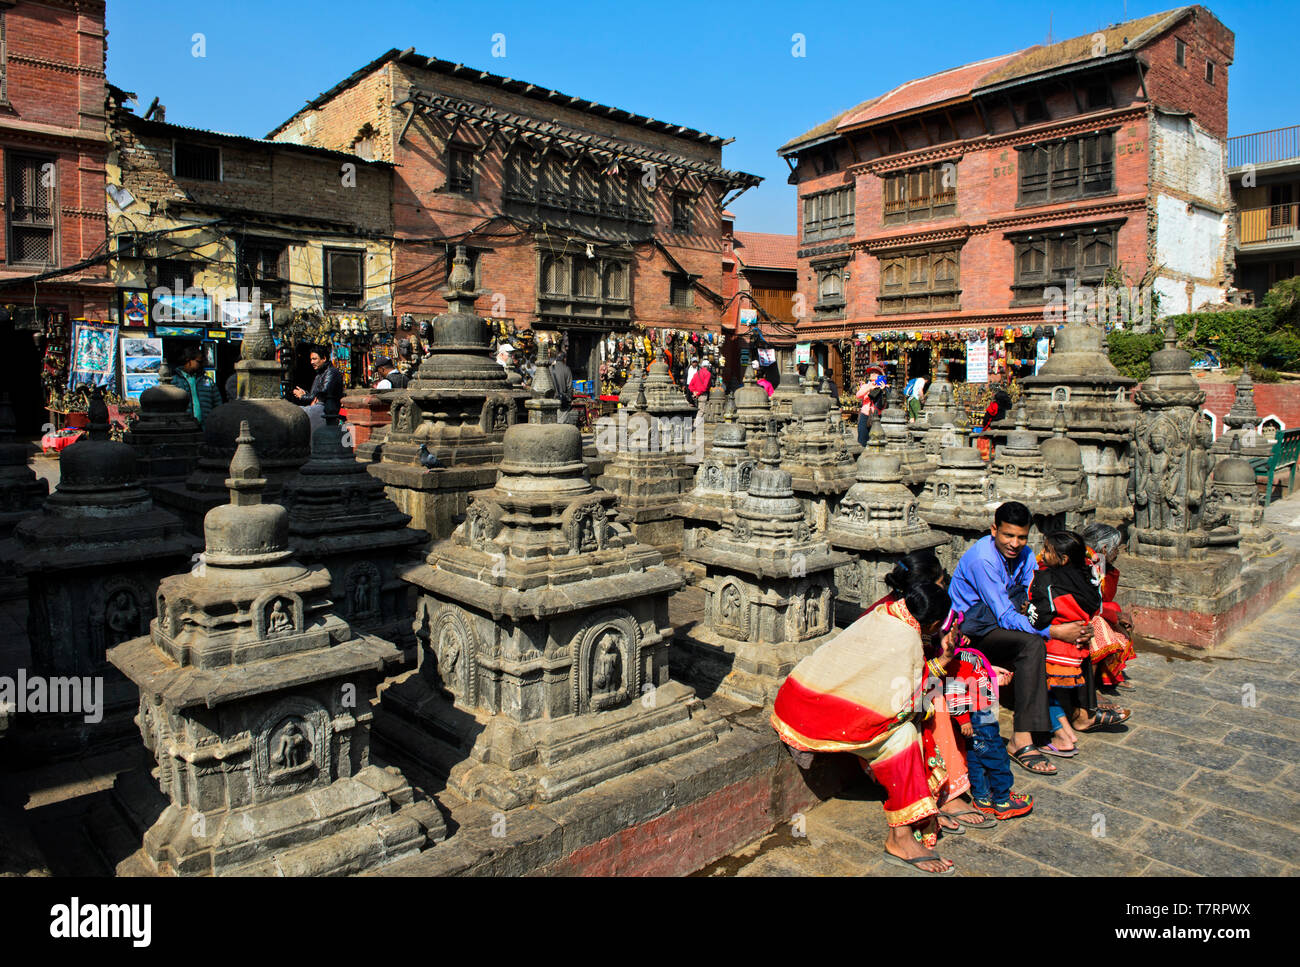 Local family in colorful dresses resting on a square with stupas on the site of the Swayambhunath temple or Monkey Temple, Kathmandu, Nepal Stock Photo